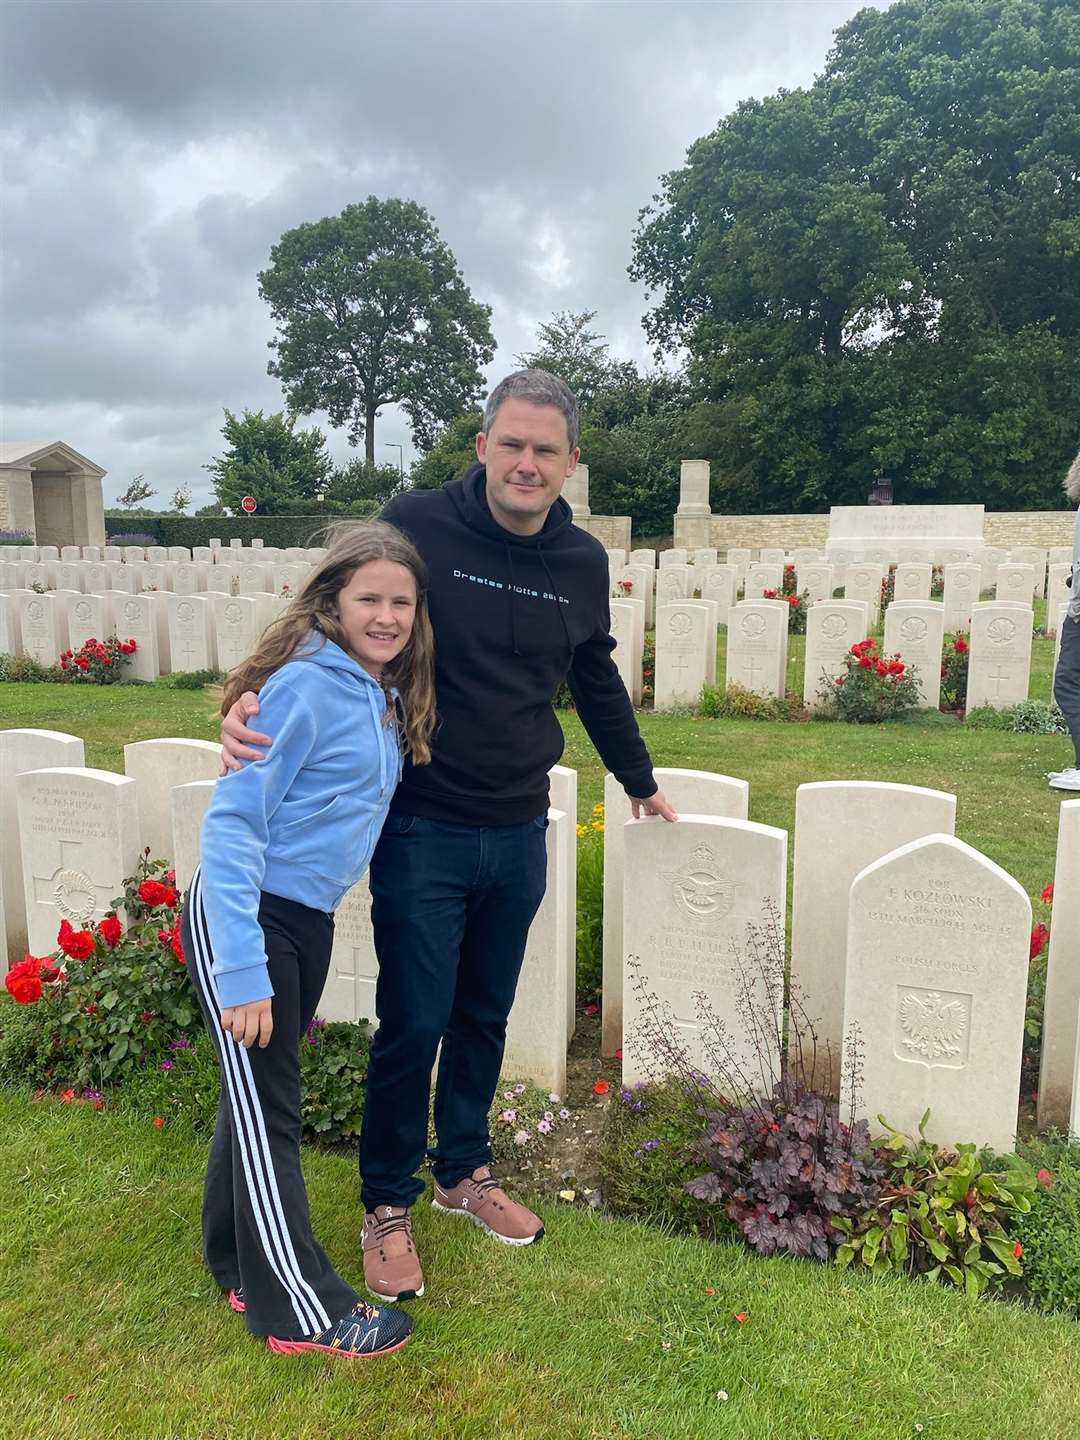 Alex Fisher and his daughter in the cemetery where the RAF crew members including James Hamilton Ross are buried.